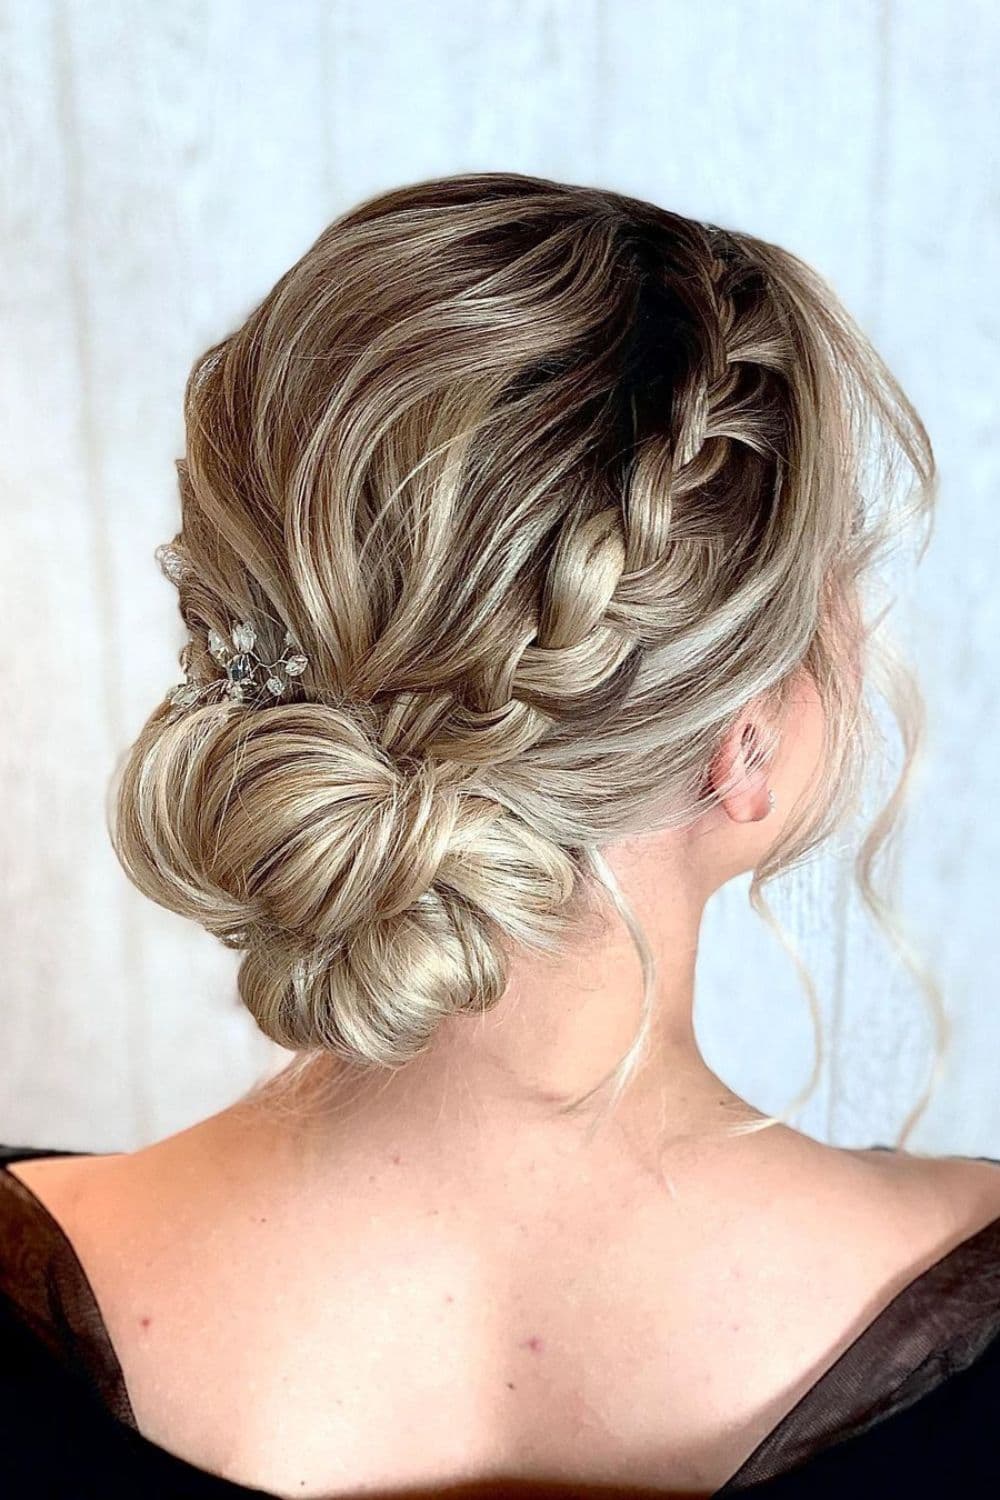 A woman with a blonde French braid bun with shadow roots.